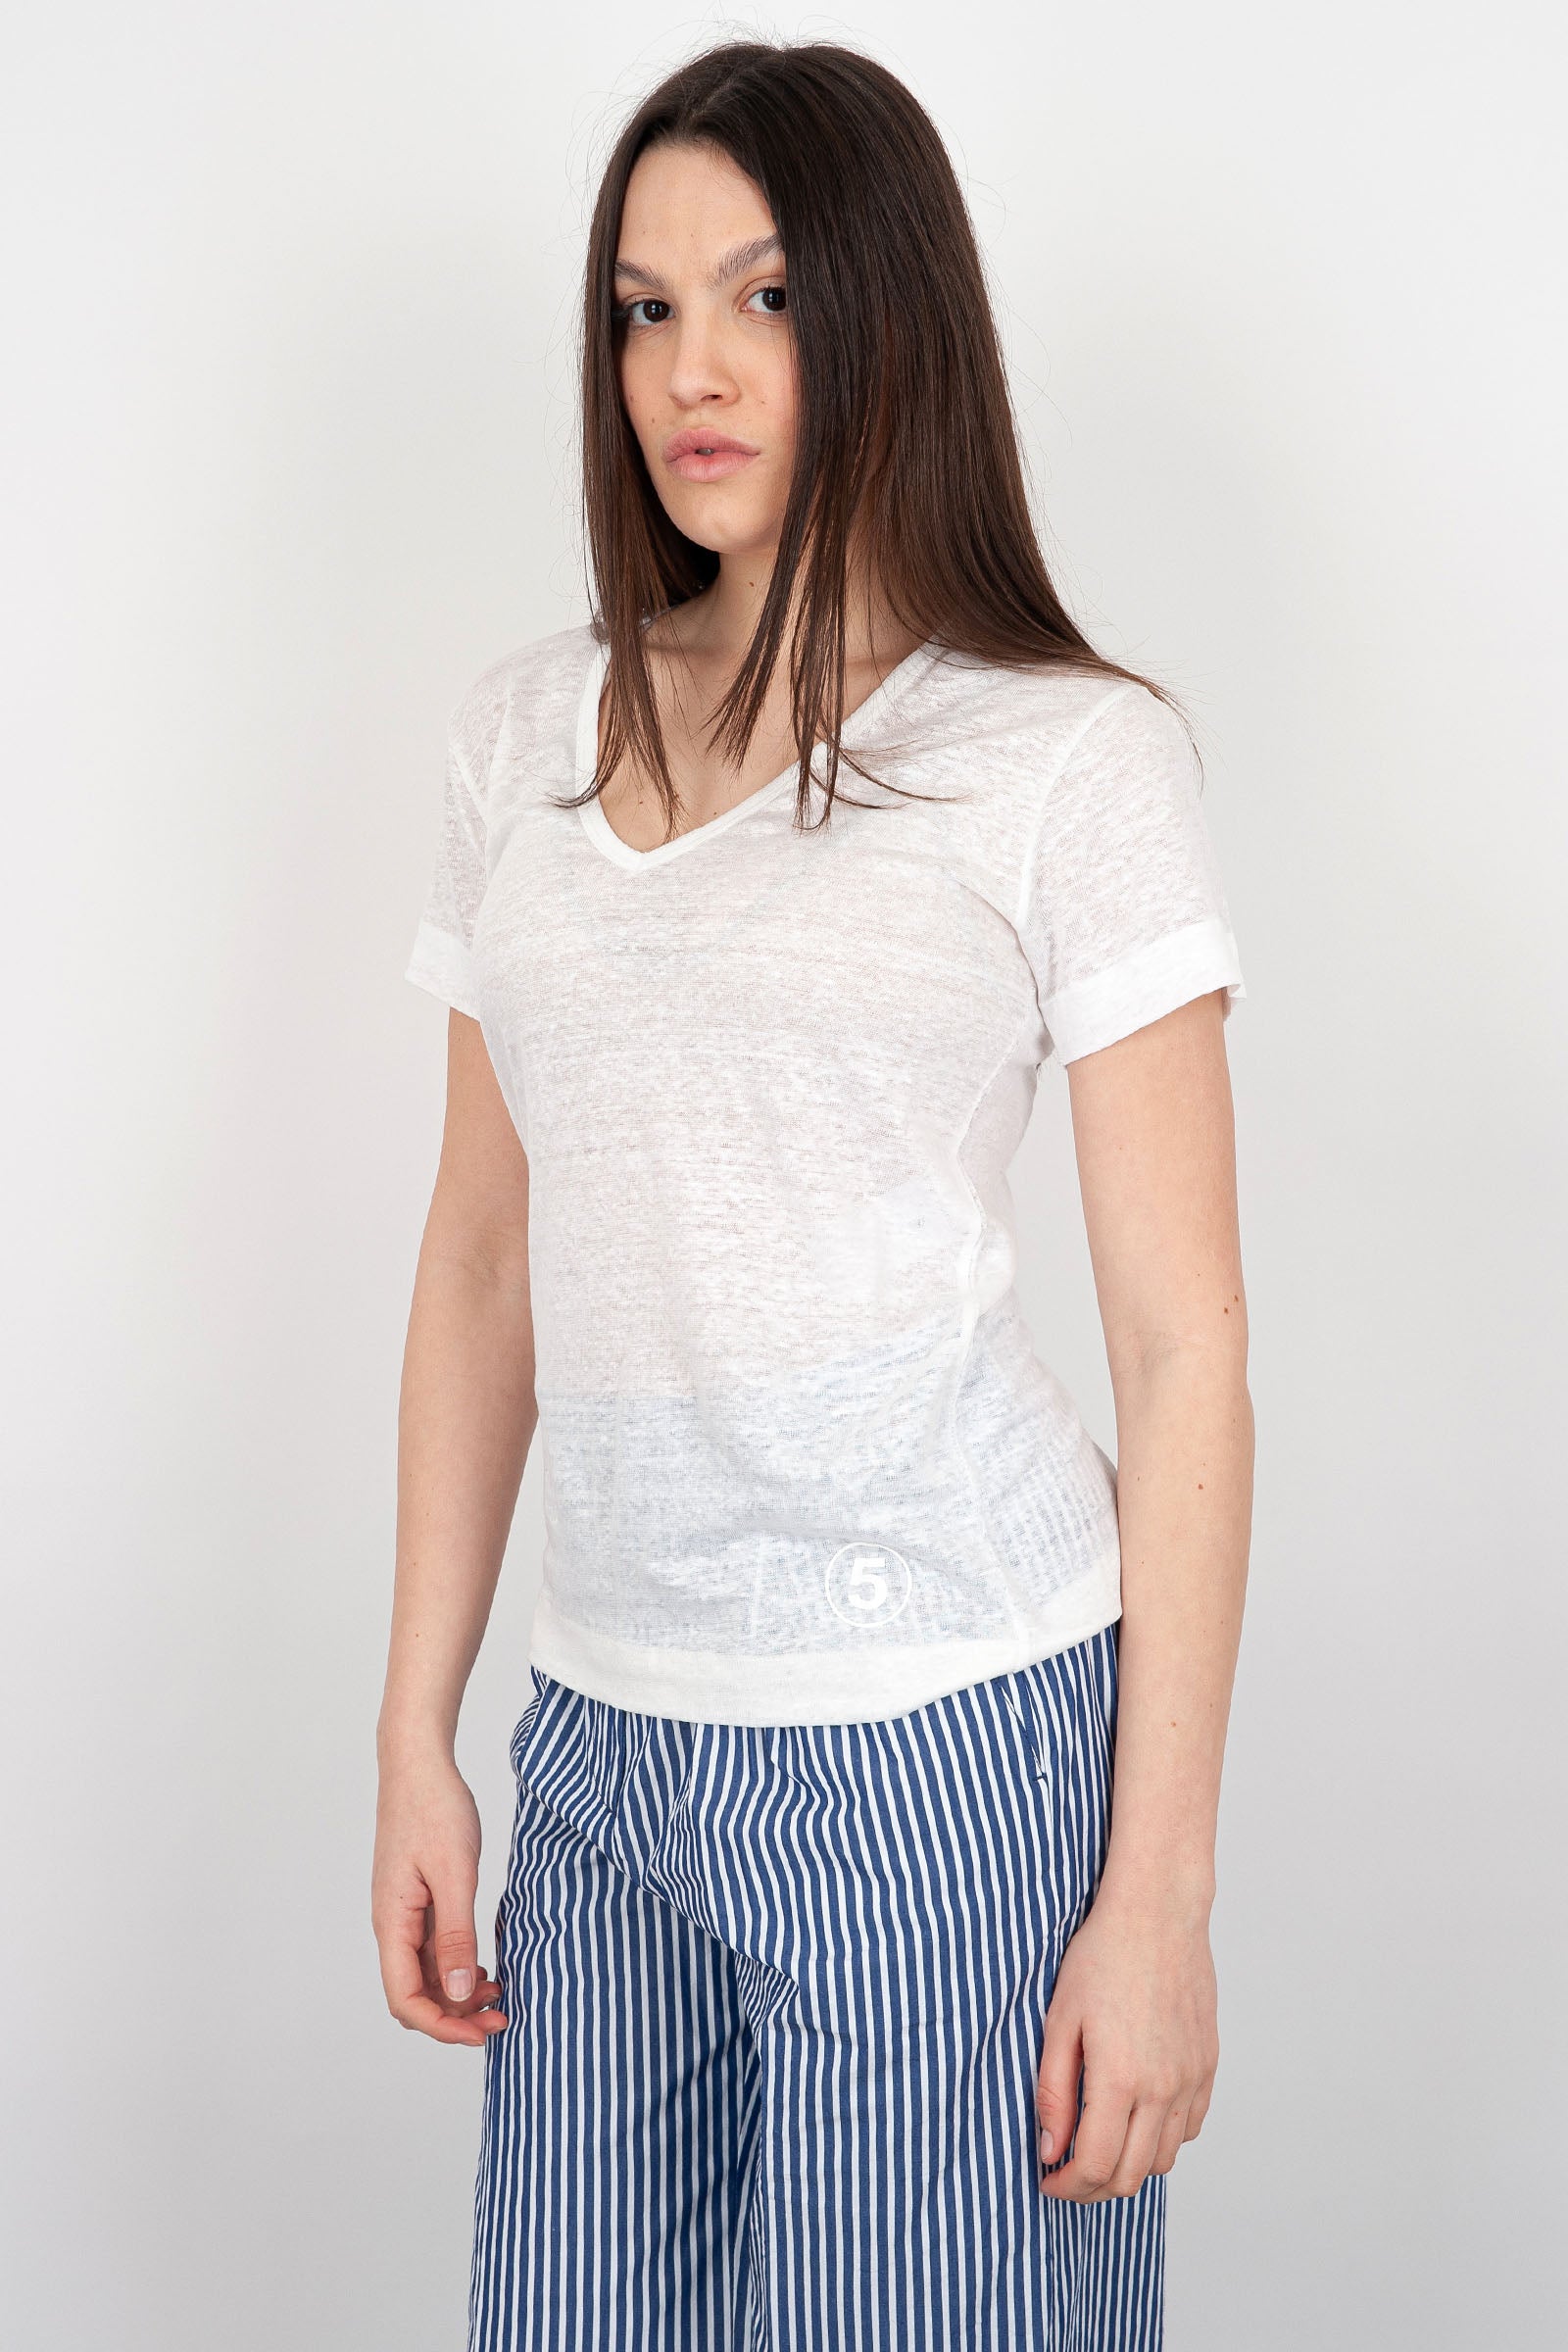 Department Five T-Shirt Doheny Linen White - 3